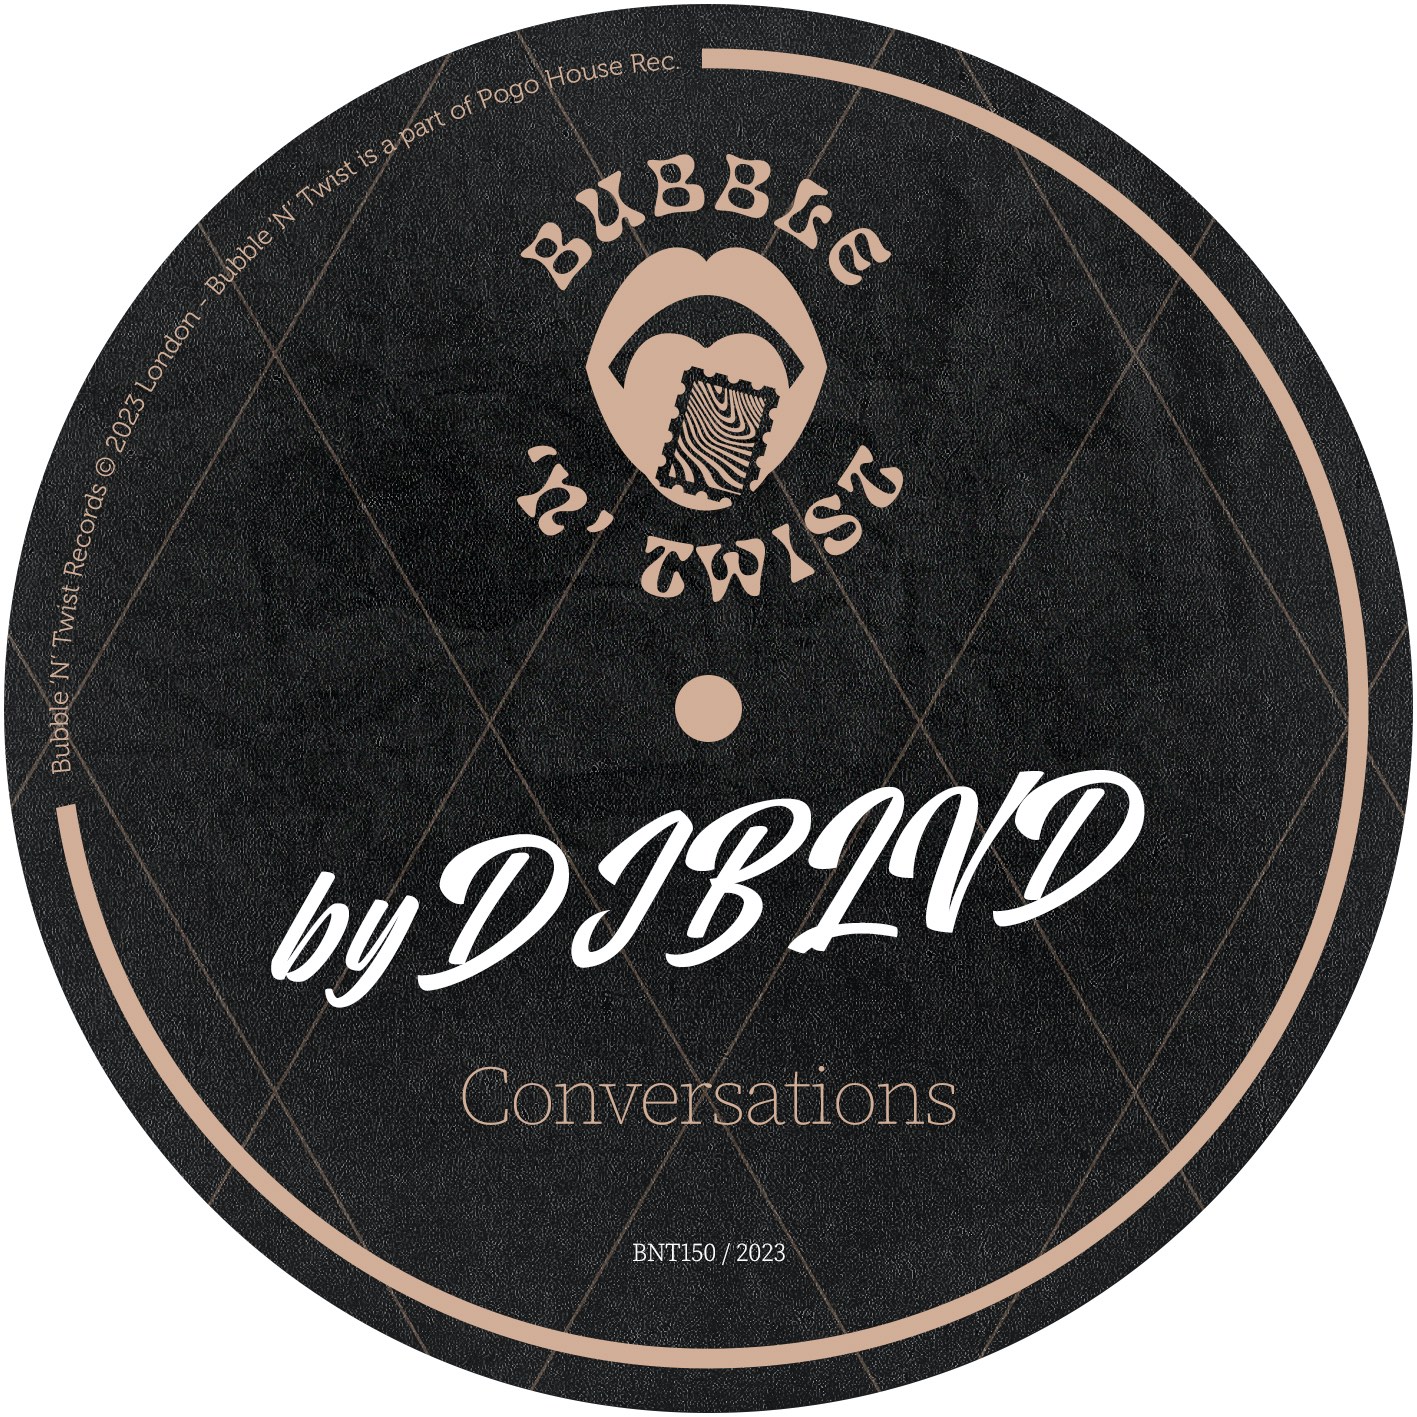 Listen to byDJBLVD's 'Conversations' Now